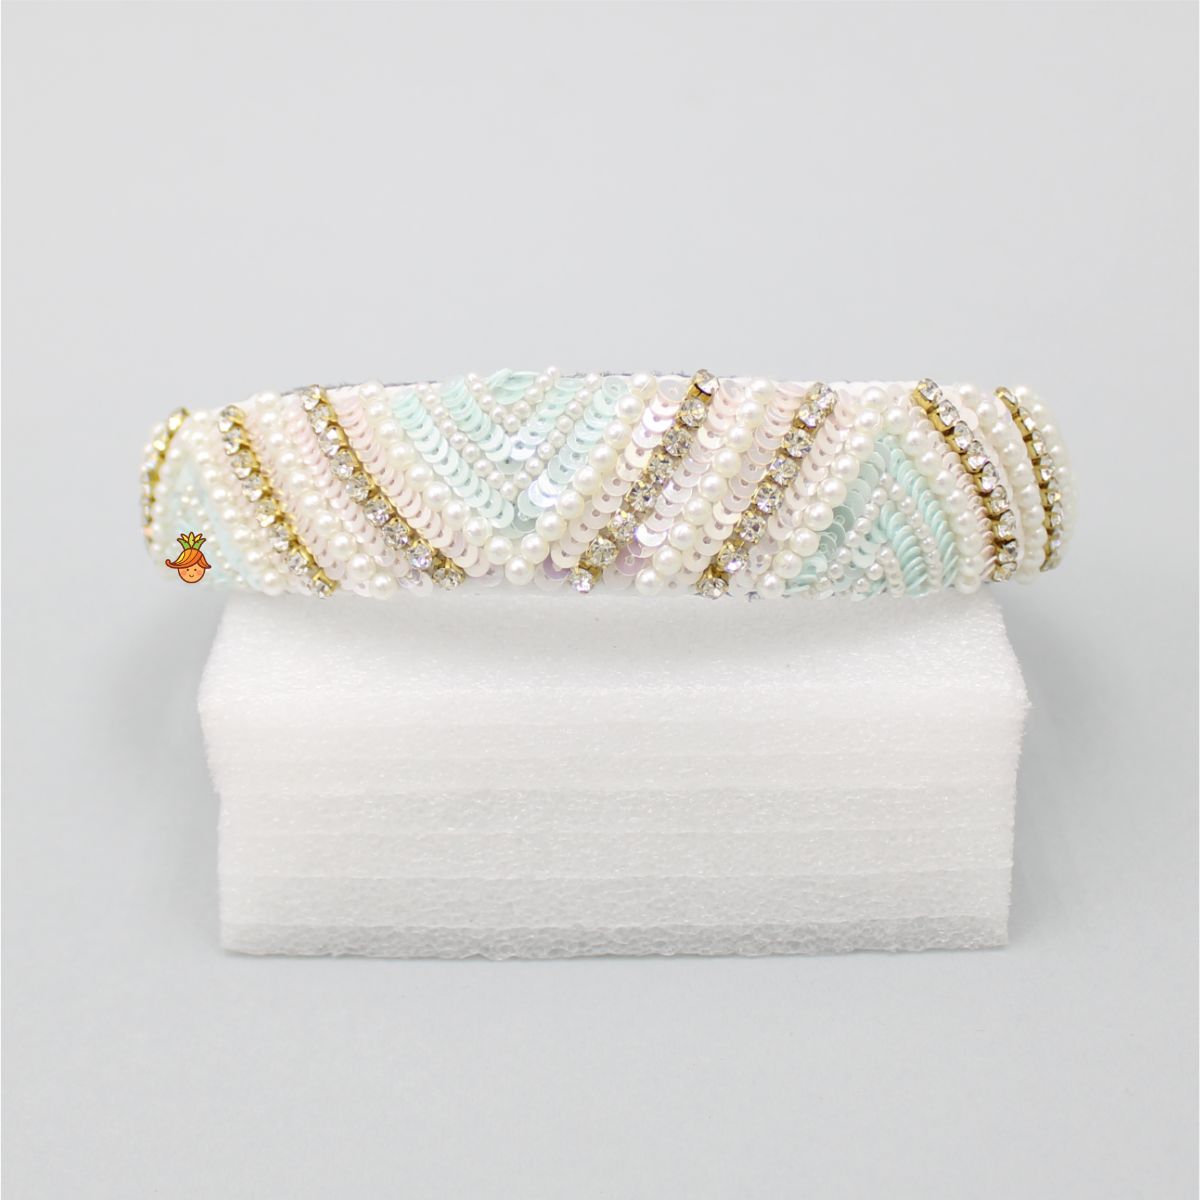 Delightful Pearly And Sequined White Hair Band